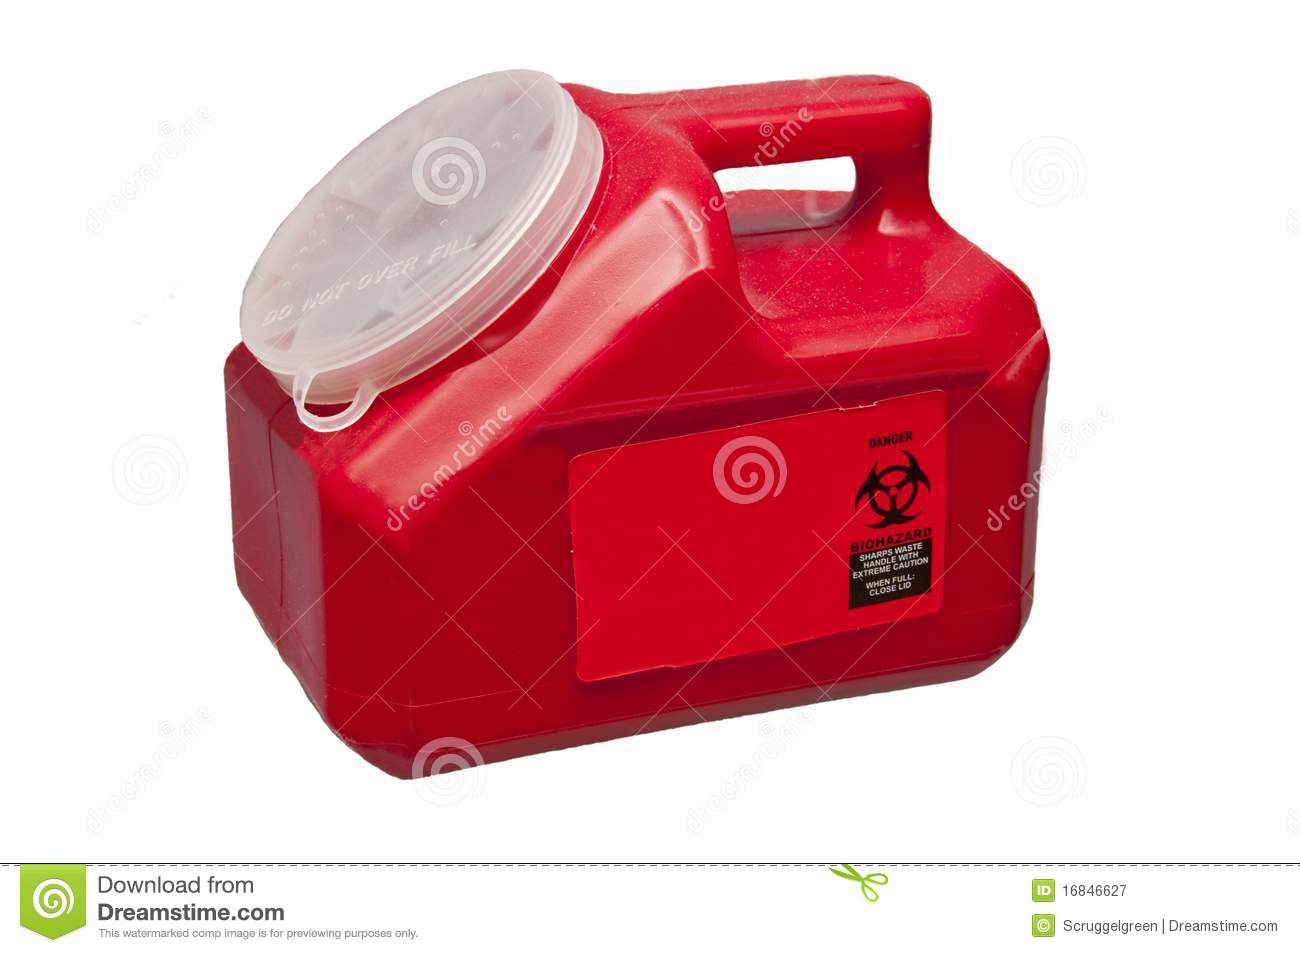 Sharps Container Royalty Free Stock Photography   Image  16846627